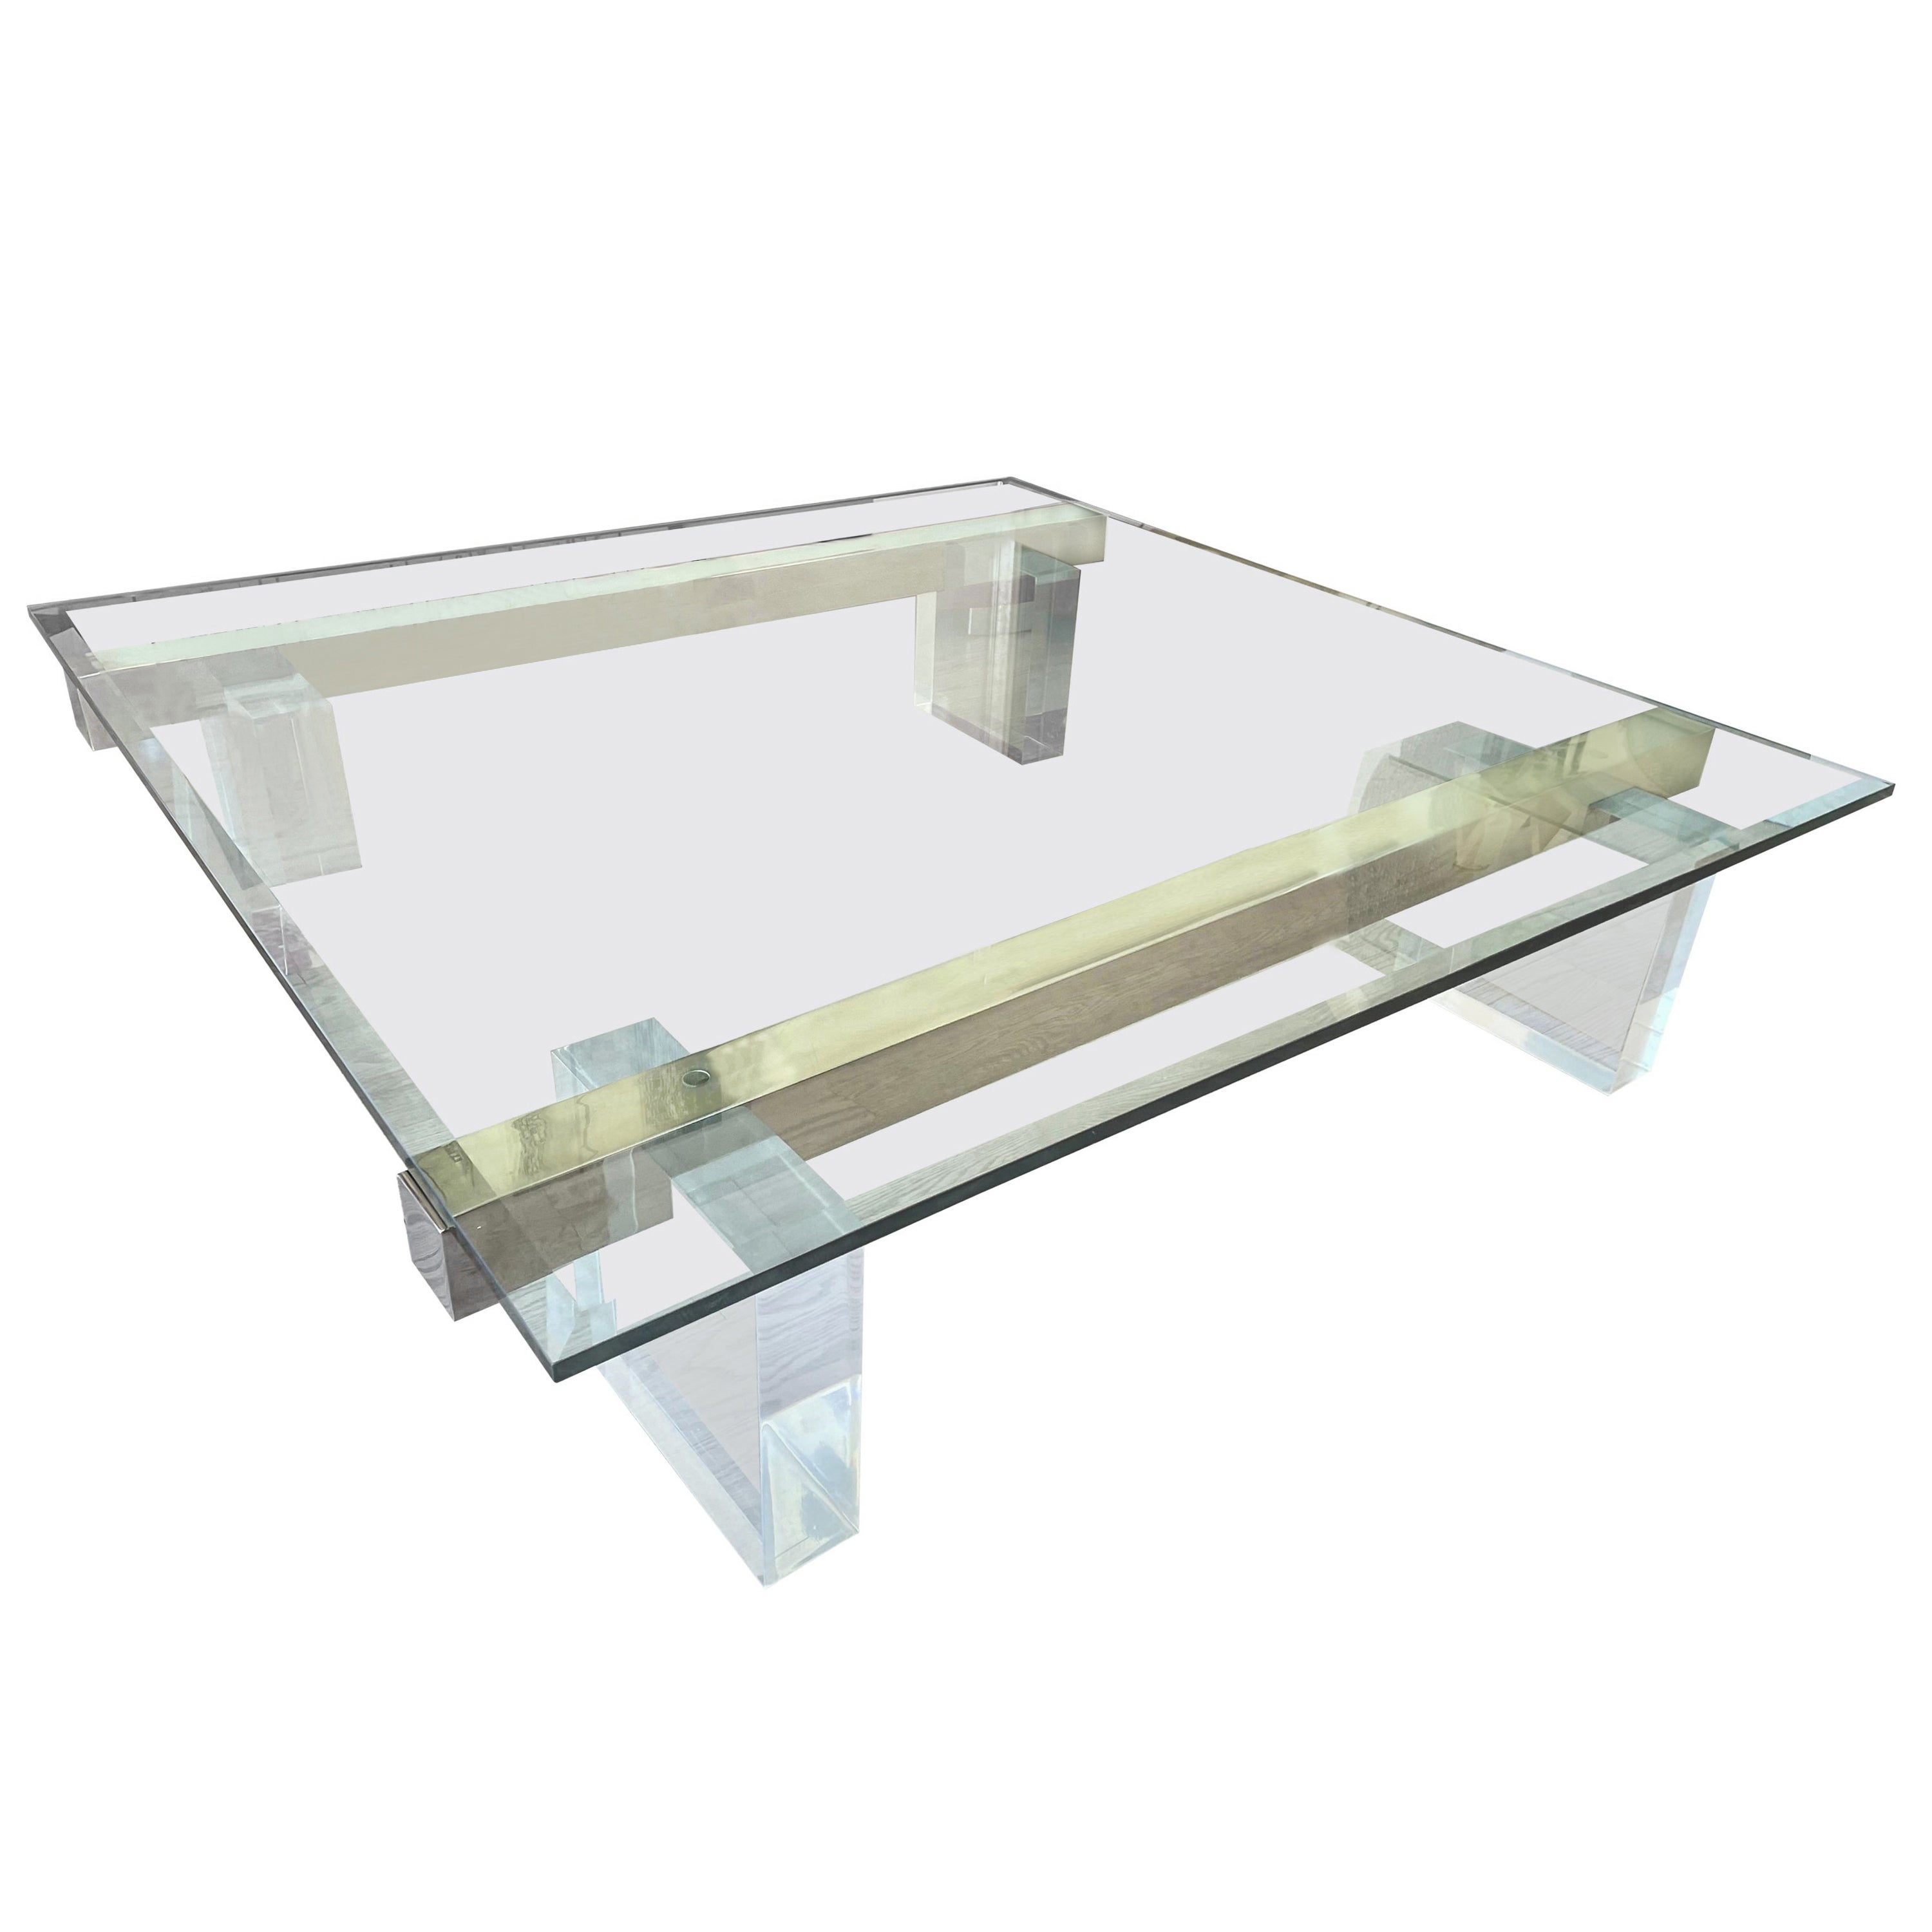 Large 1980s Lucite and Steel Coffee Table